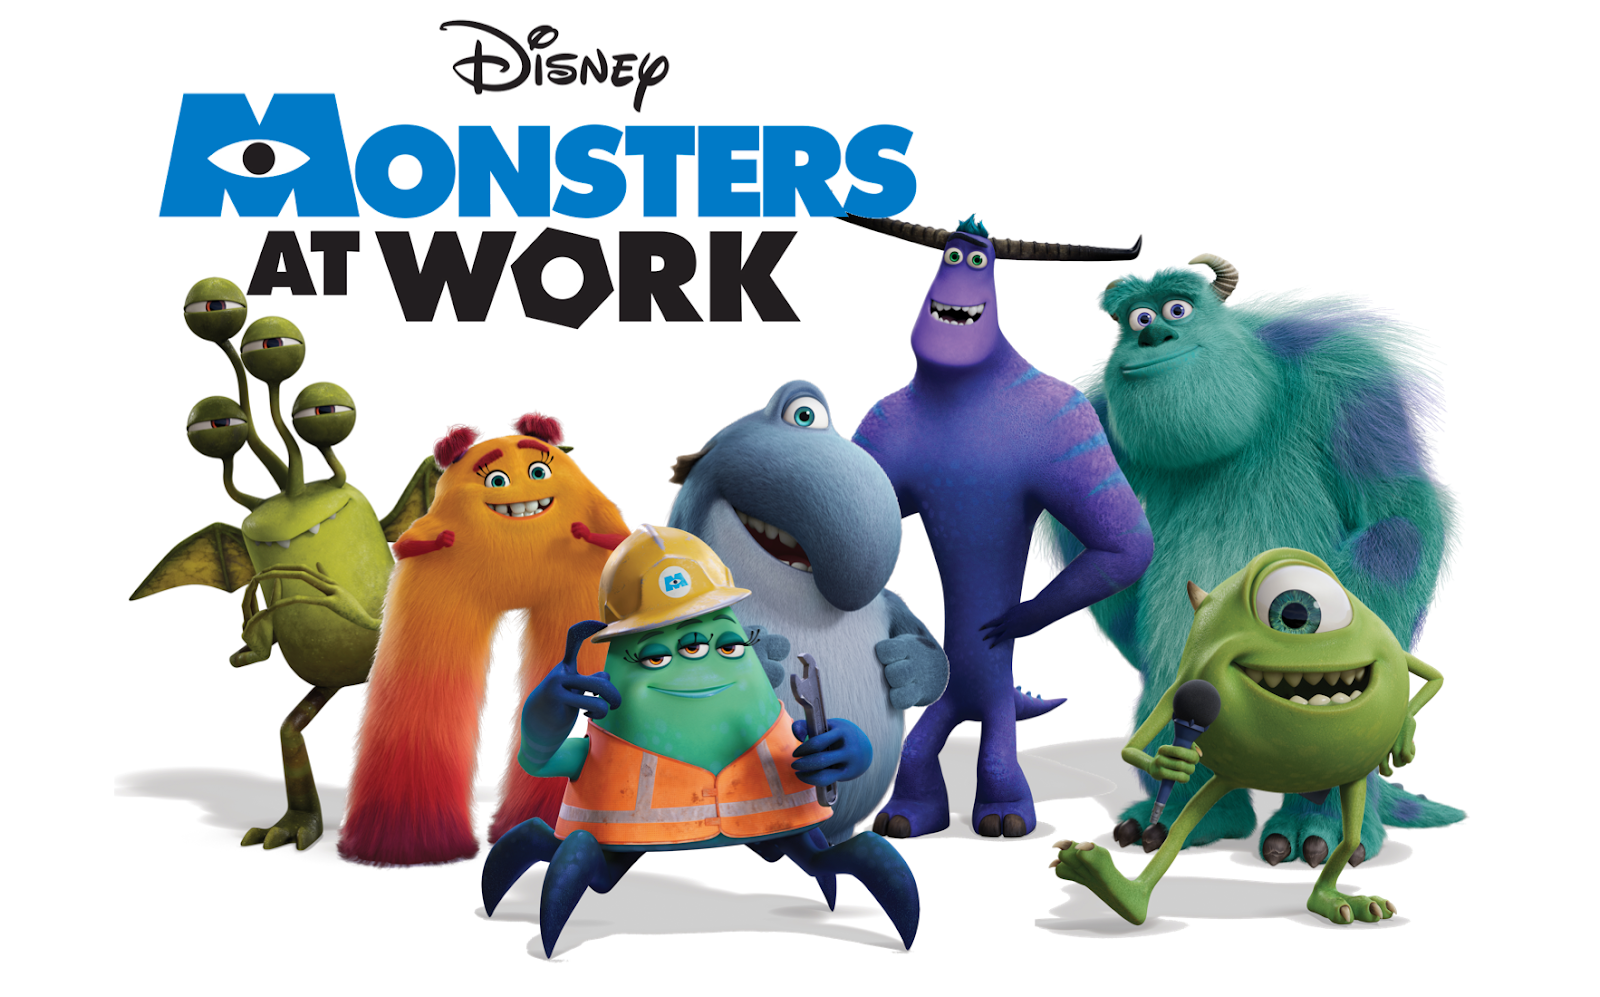 Monsters at Work cast